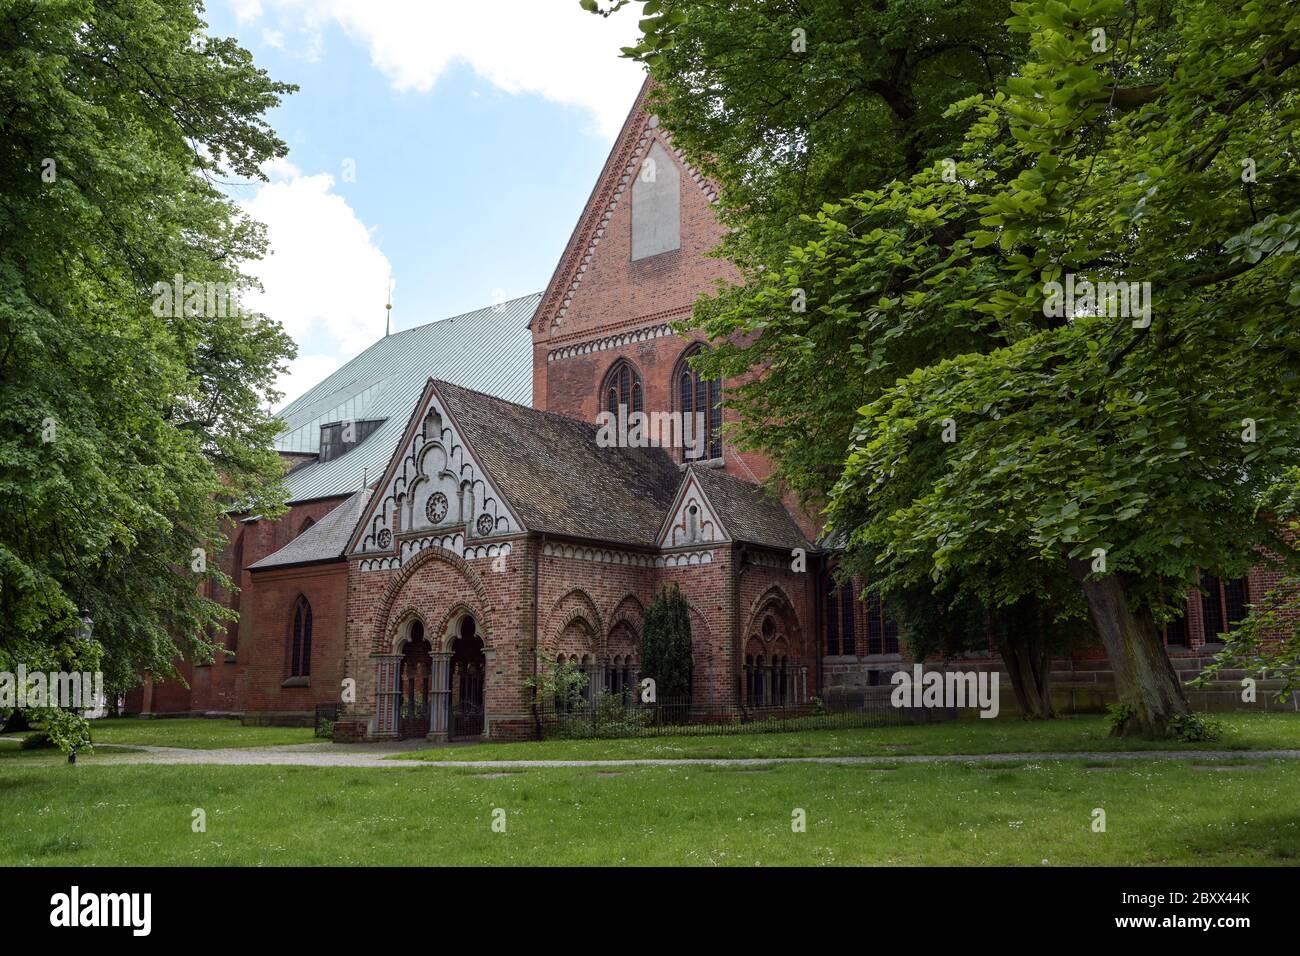 Narthex called paradise at the Luebeck cathedral built with open arcades in brick architecture, idyllically situated between old trees Stock Photo